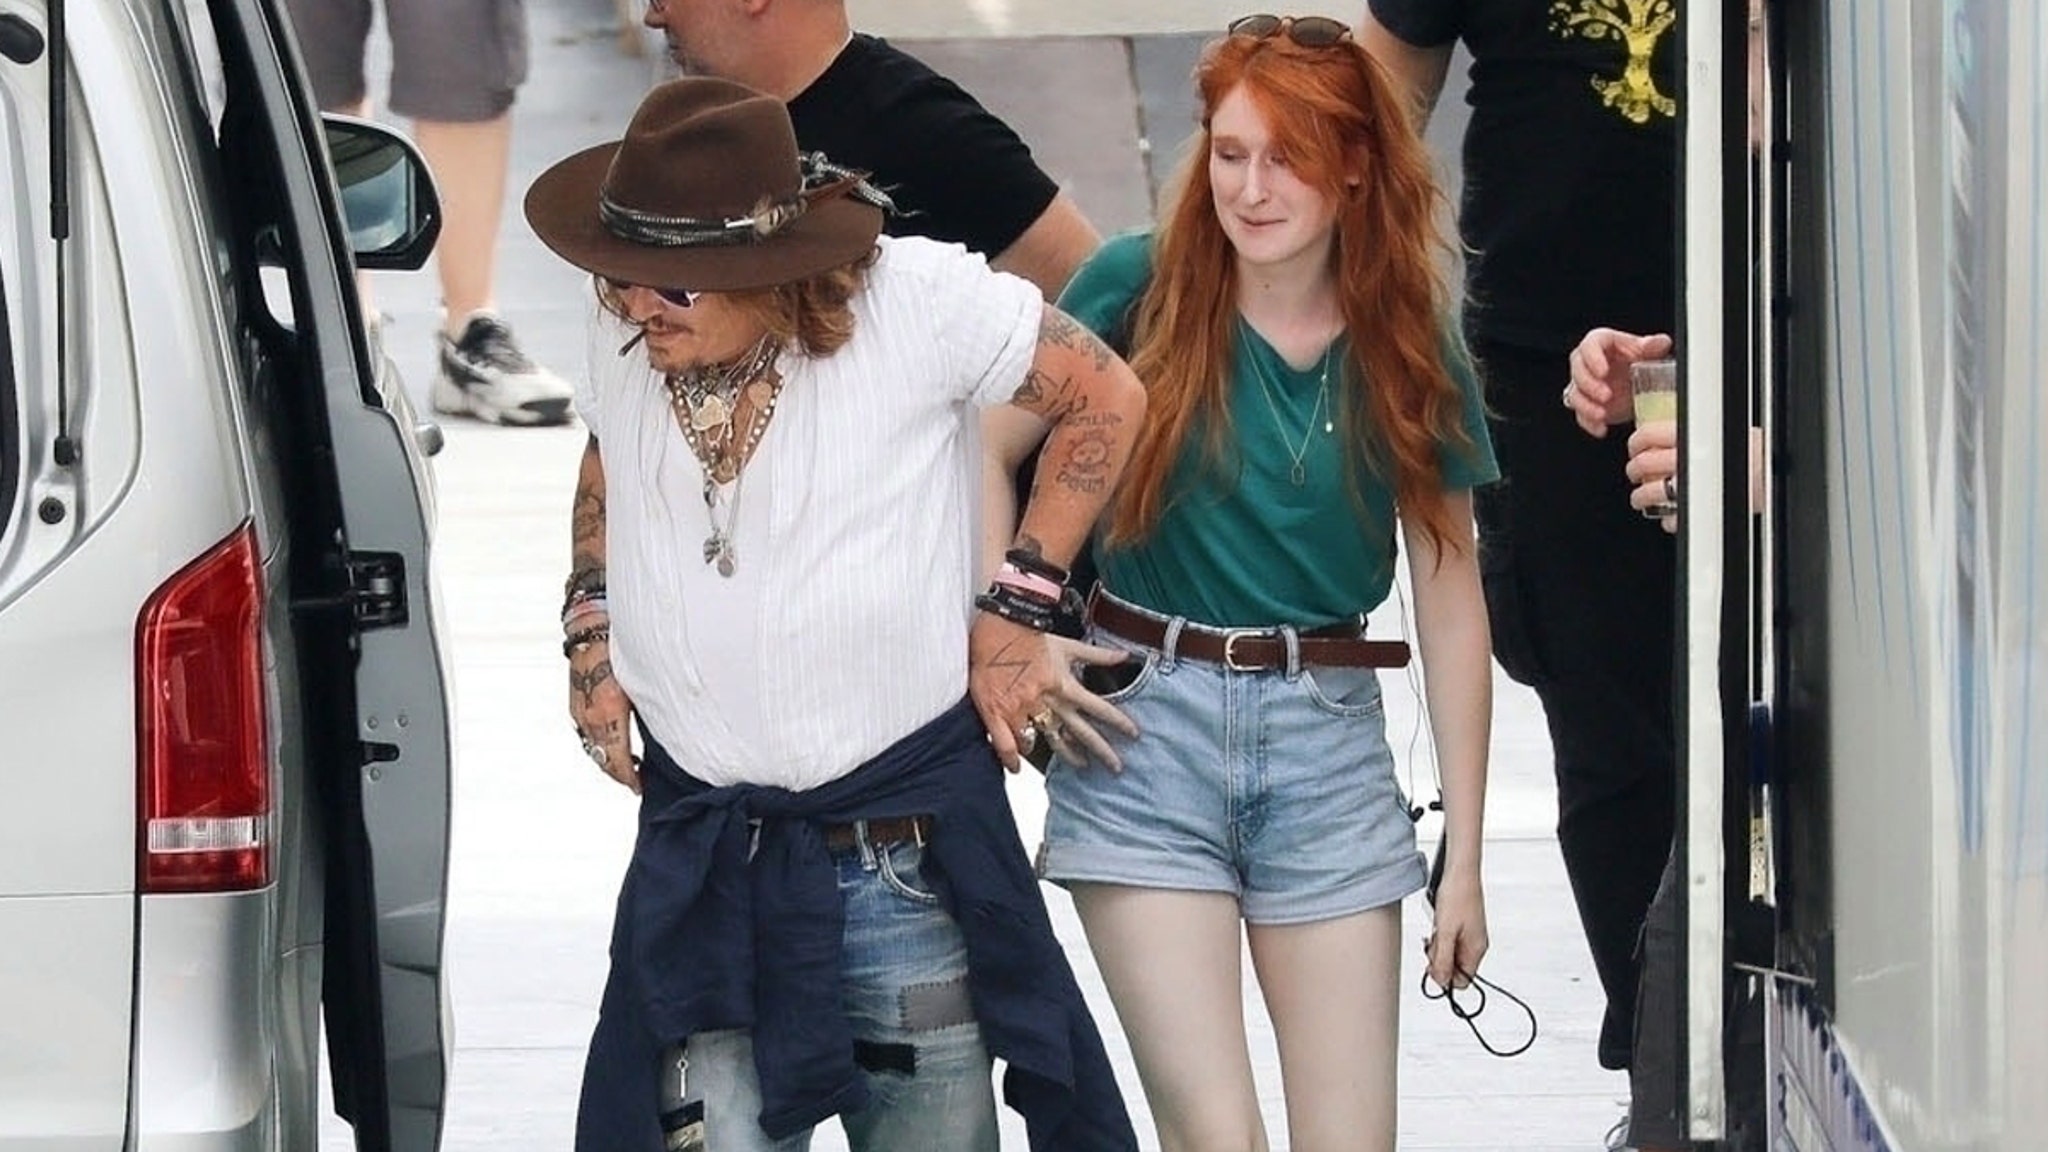 Johnny Depp Continues Music Gigs in Italy, With Cute Red-Head in Tow thumbnail